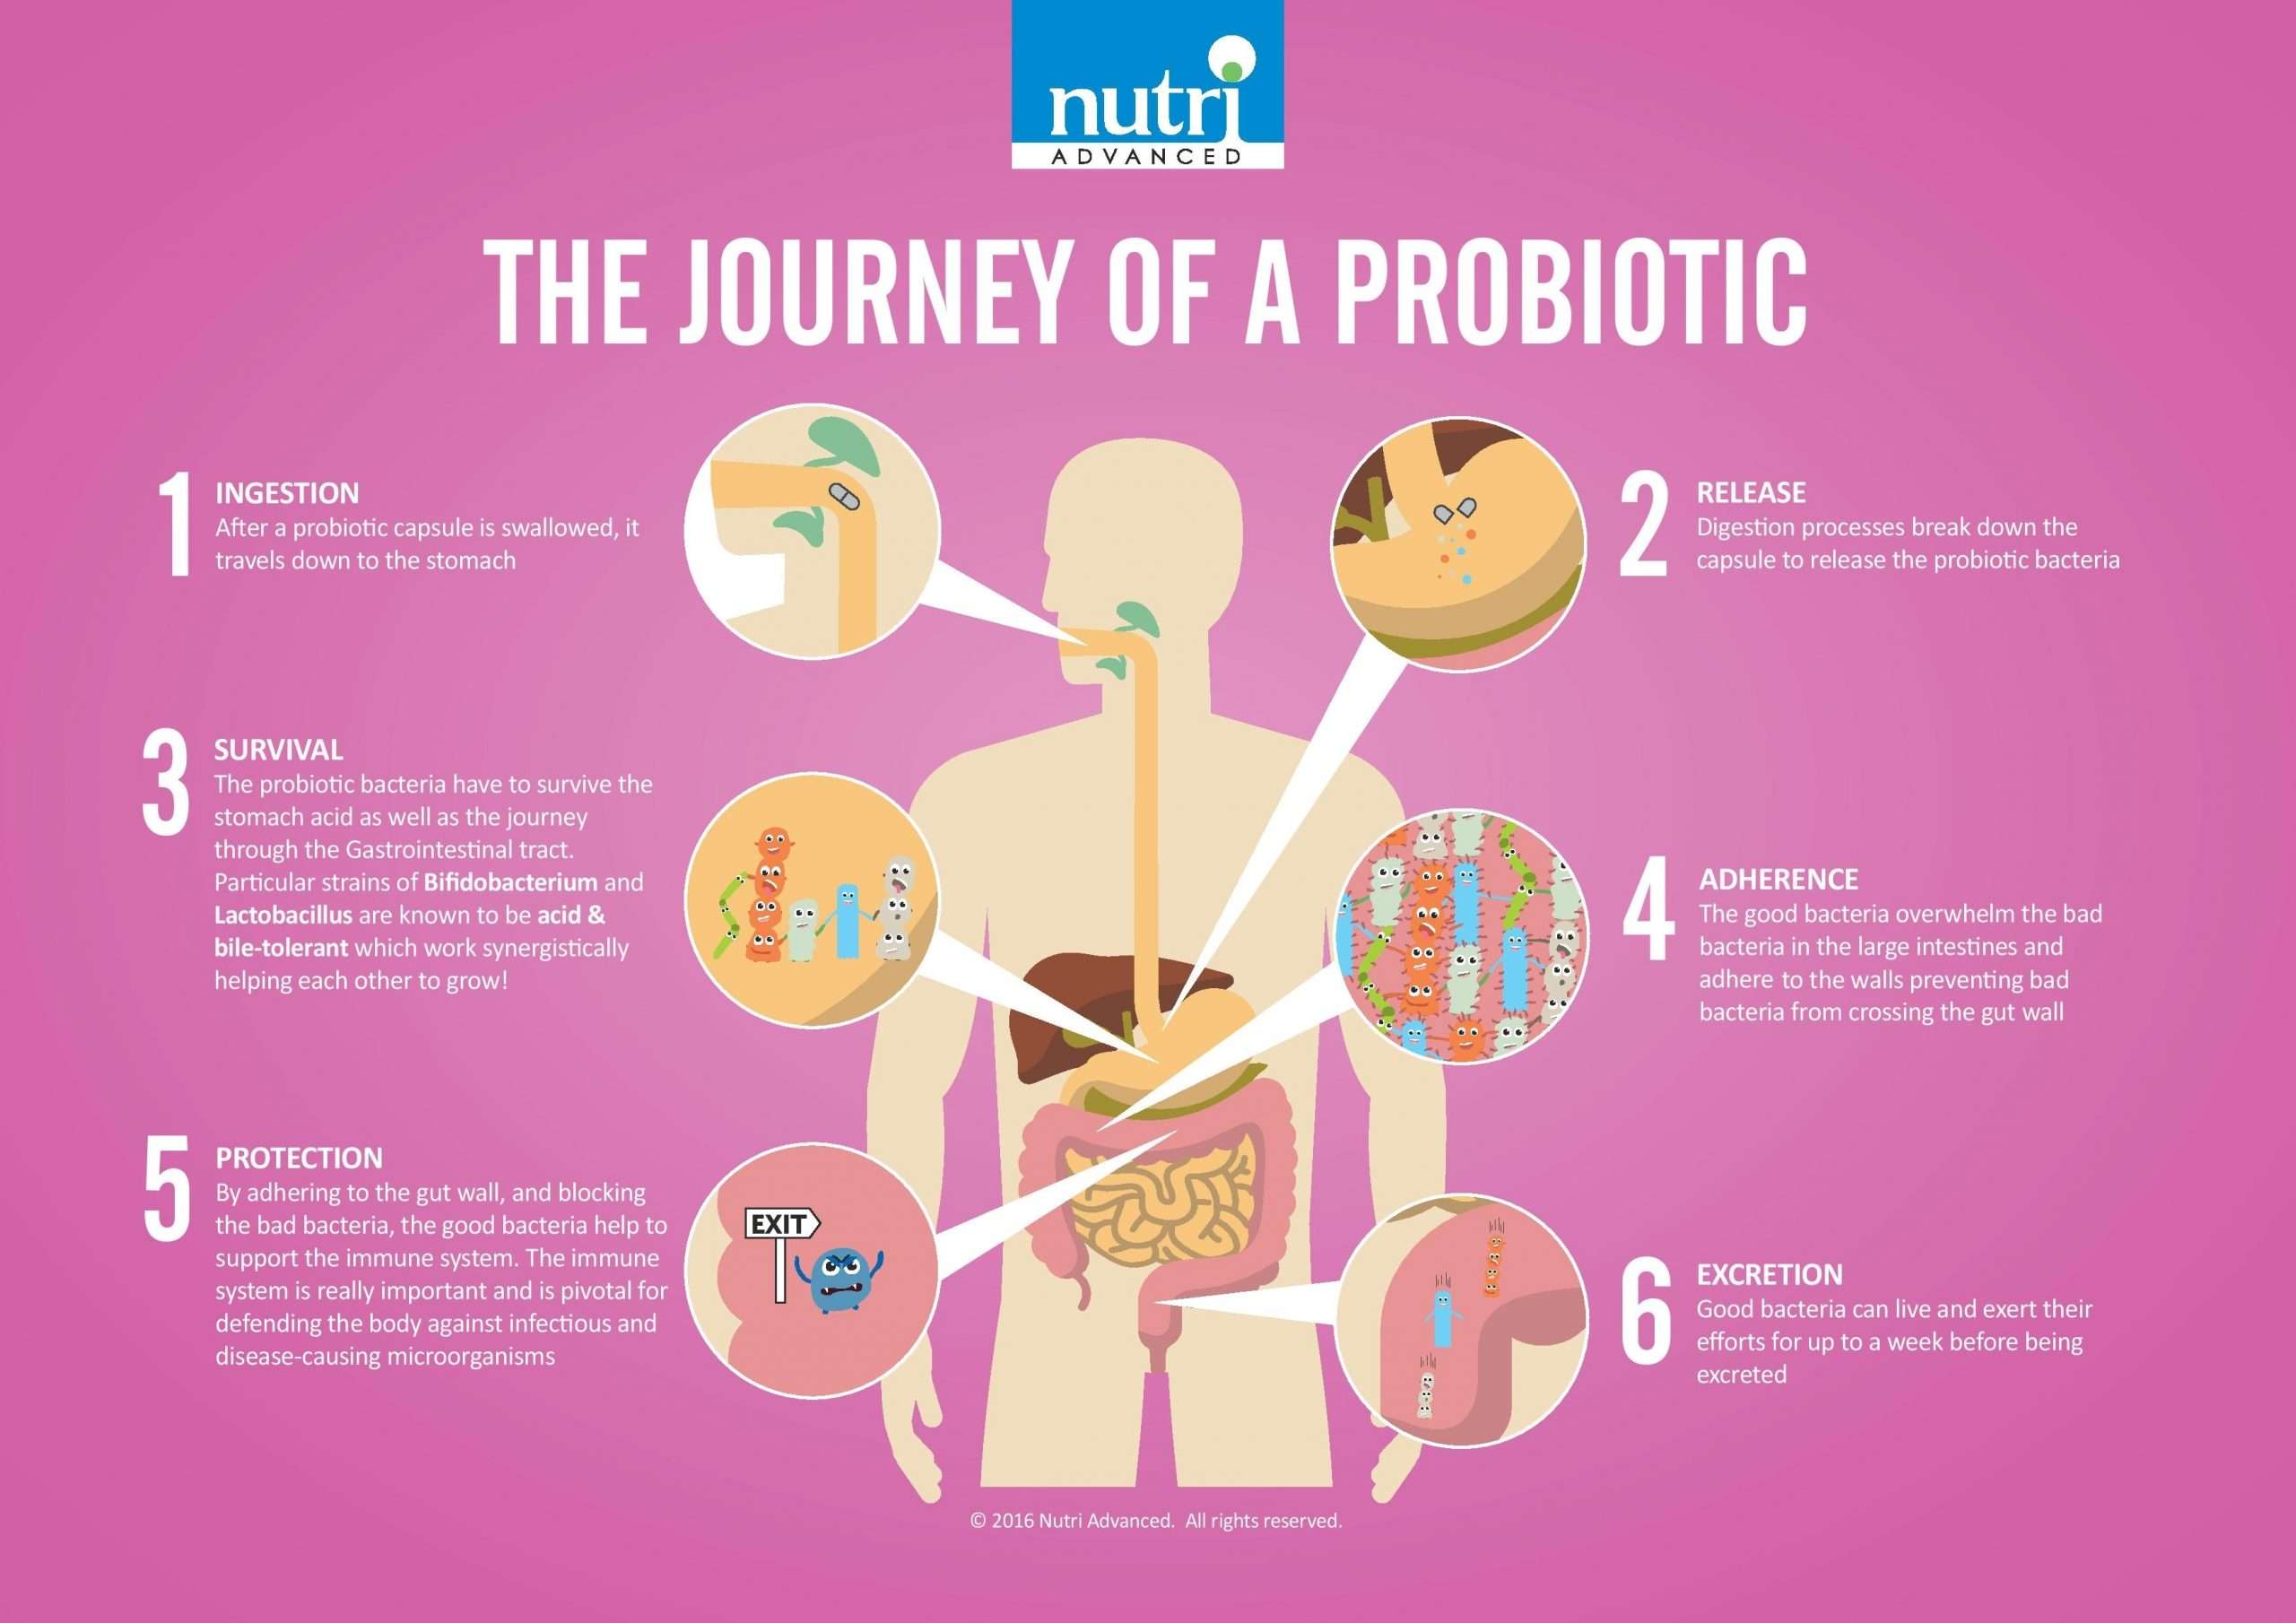 Clearing up the Confusion around Probiotics